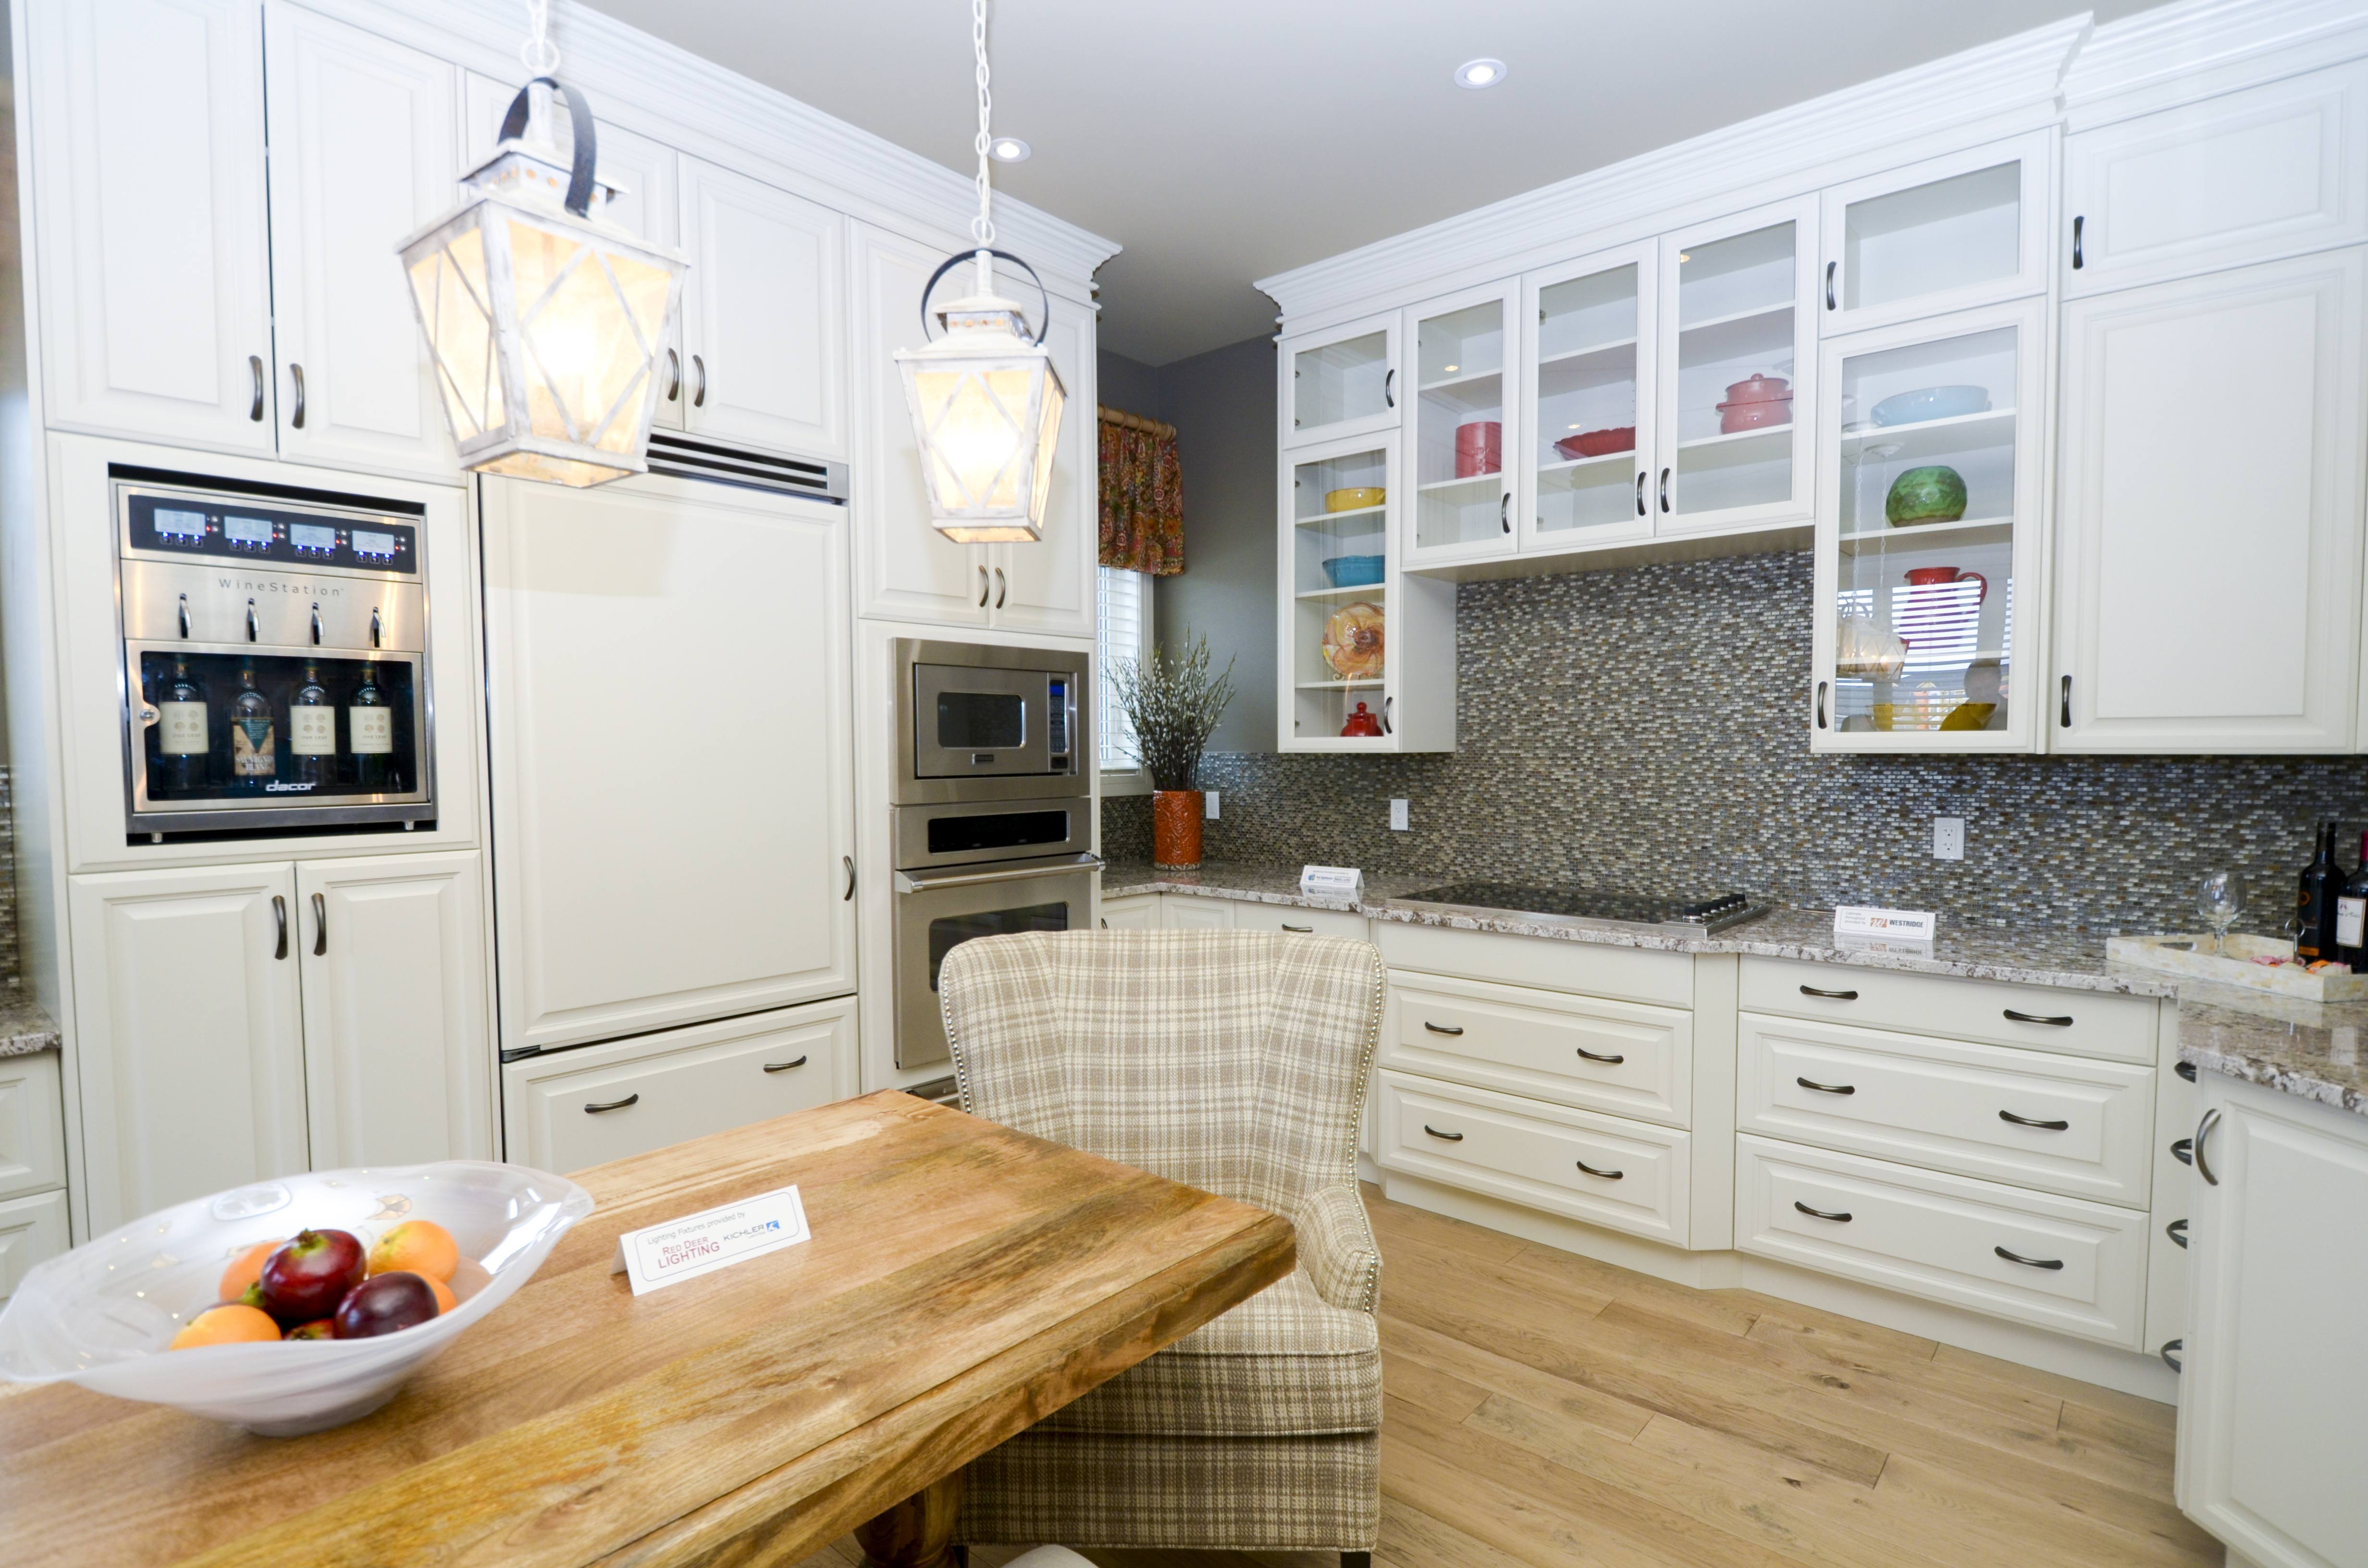 WELCOMING WHITE – This clean-cut kitchen of the Hospitals’ Lottery dream home built by Abbey Master Builders could be yours if you buy a ticket.